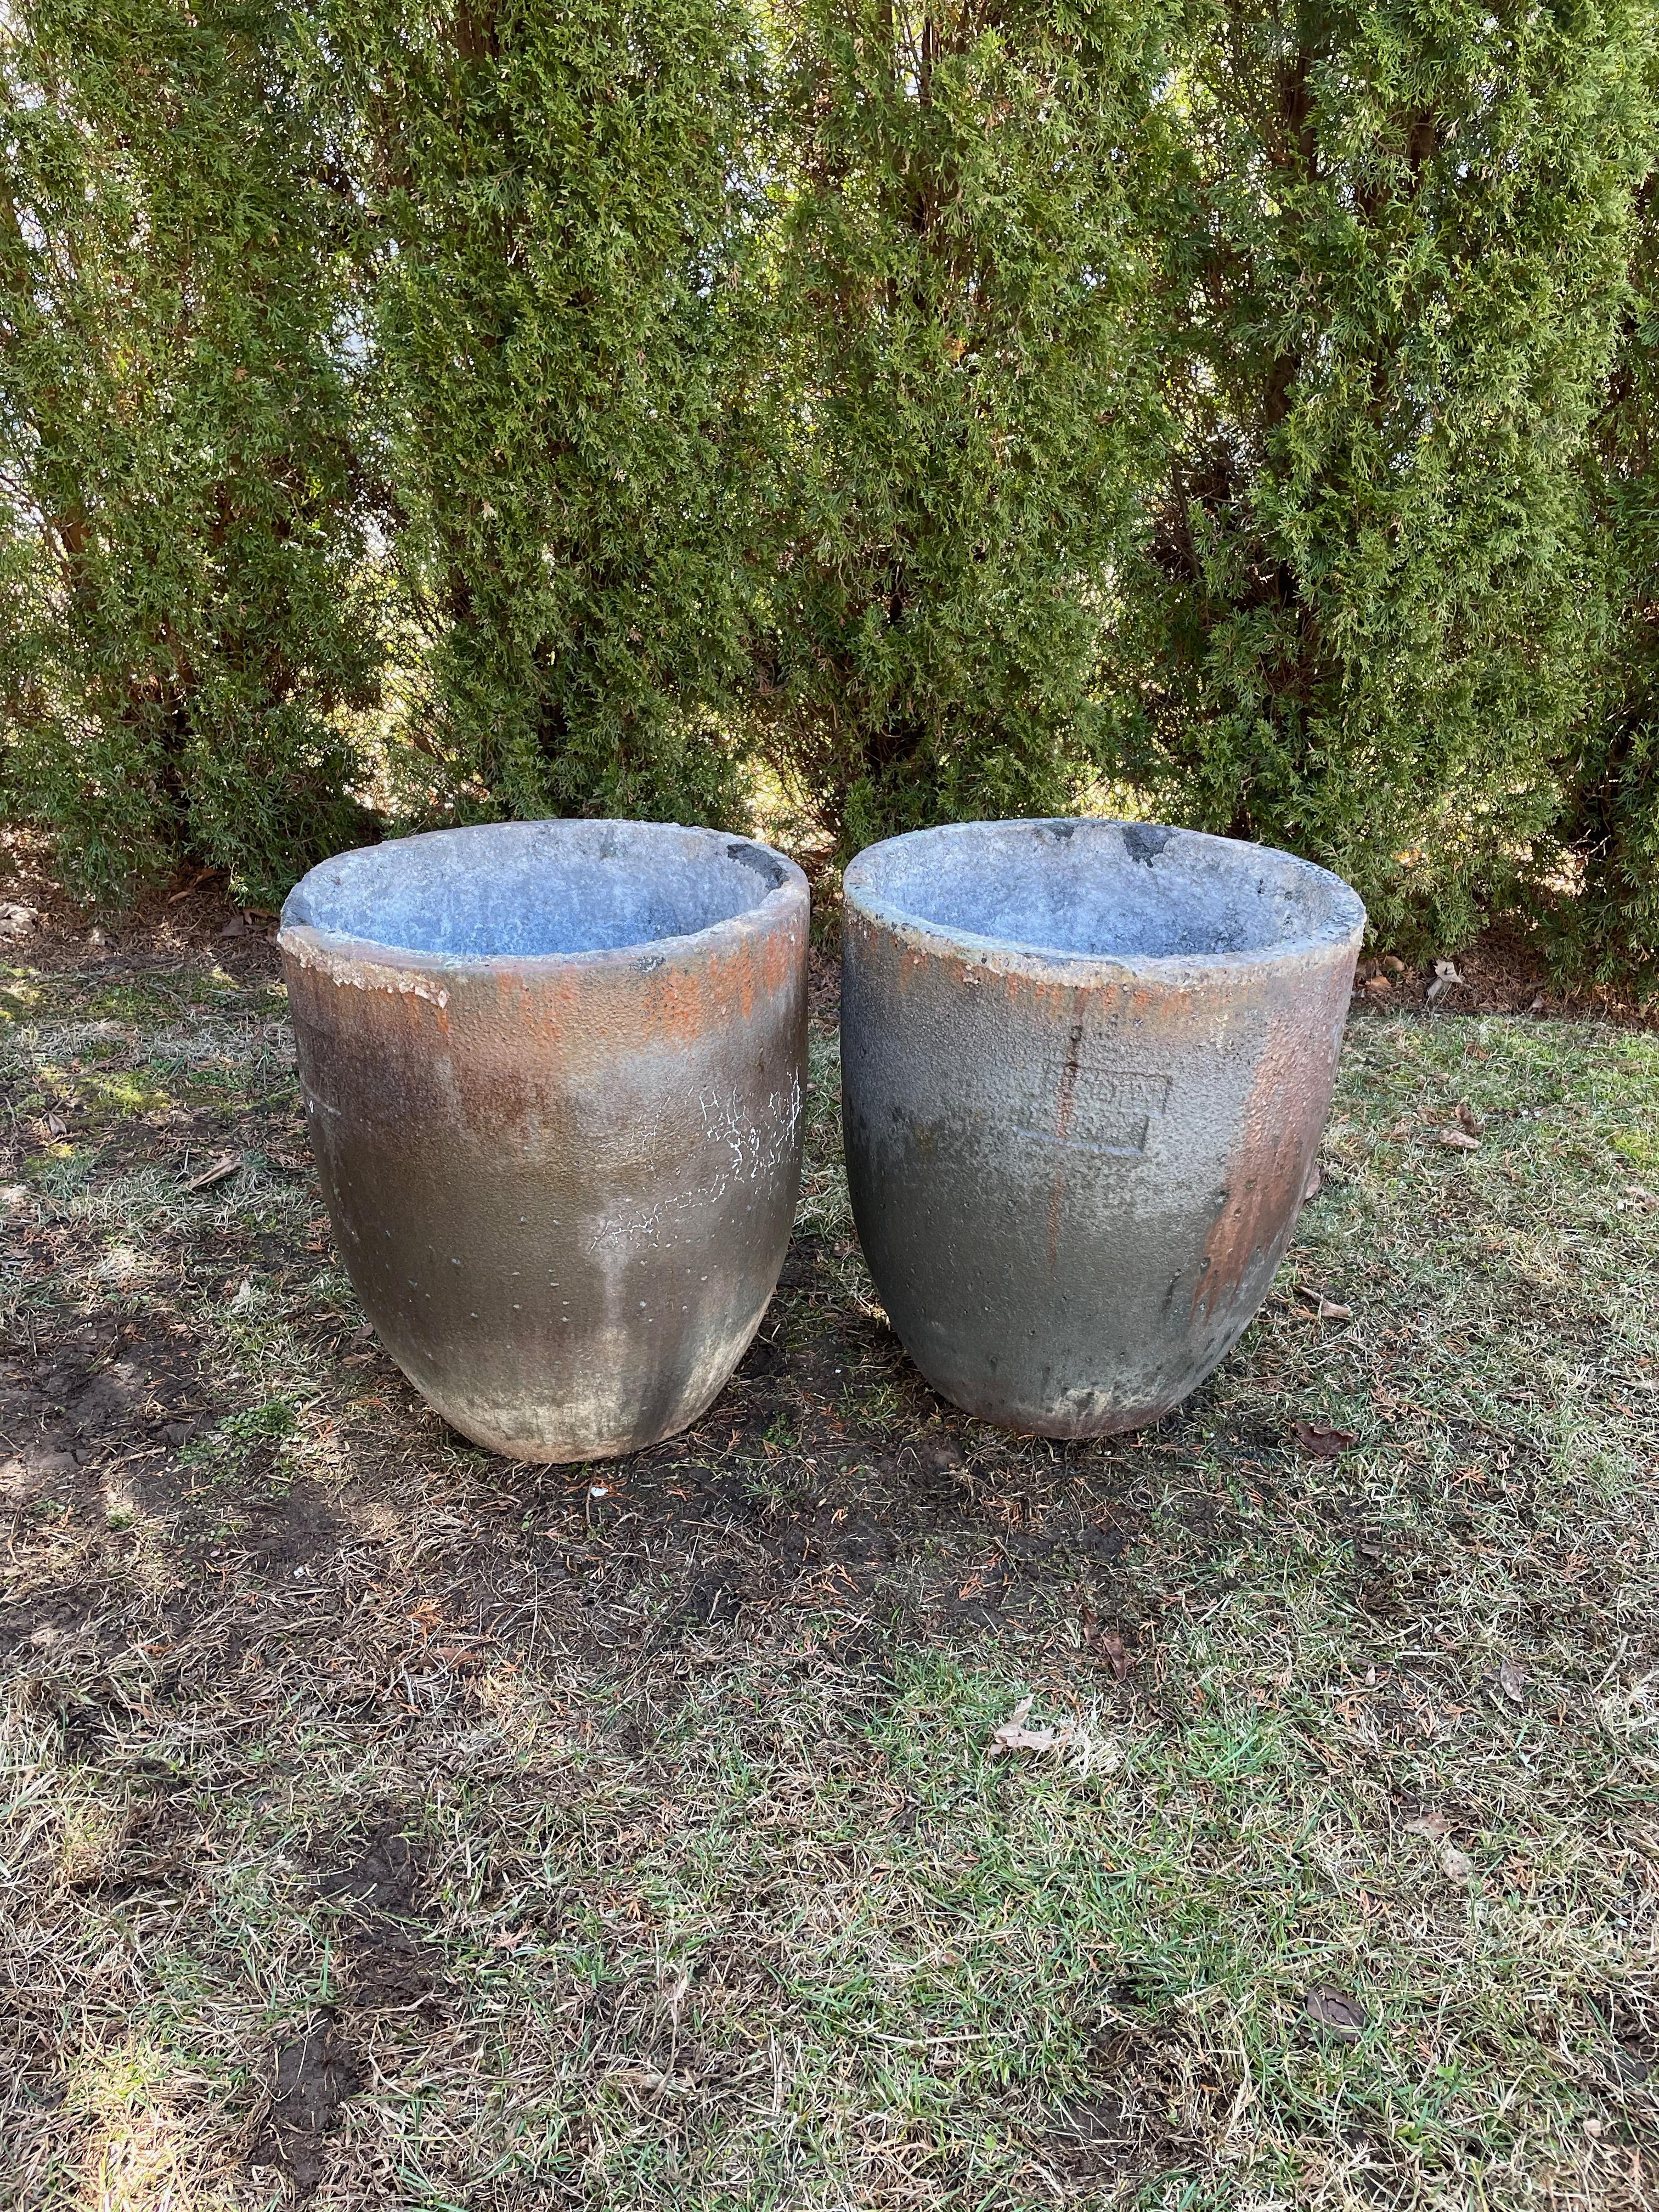 Crucibles have been used through history to smelt metal and other substances, but the ceramic ones make outstanding planters (and fire pits). This pair has a dark mottled coppery-colored hue with a subtle sheen to the surface and commodious planting